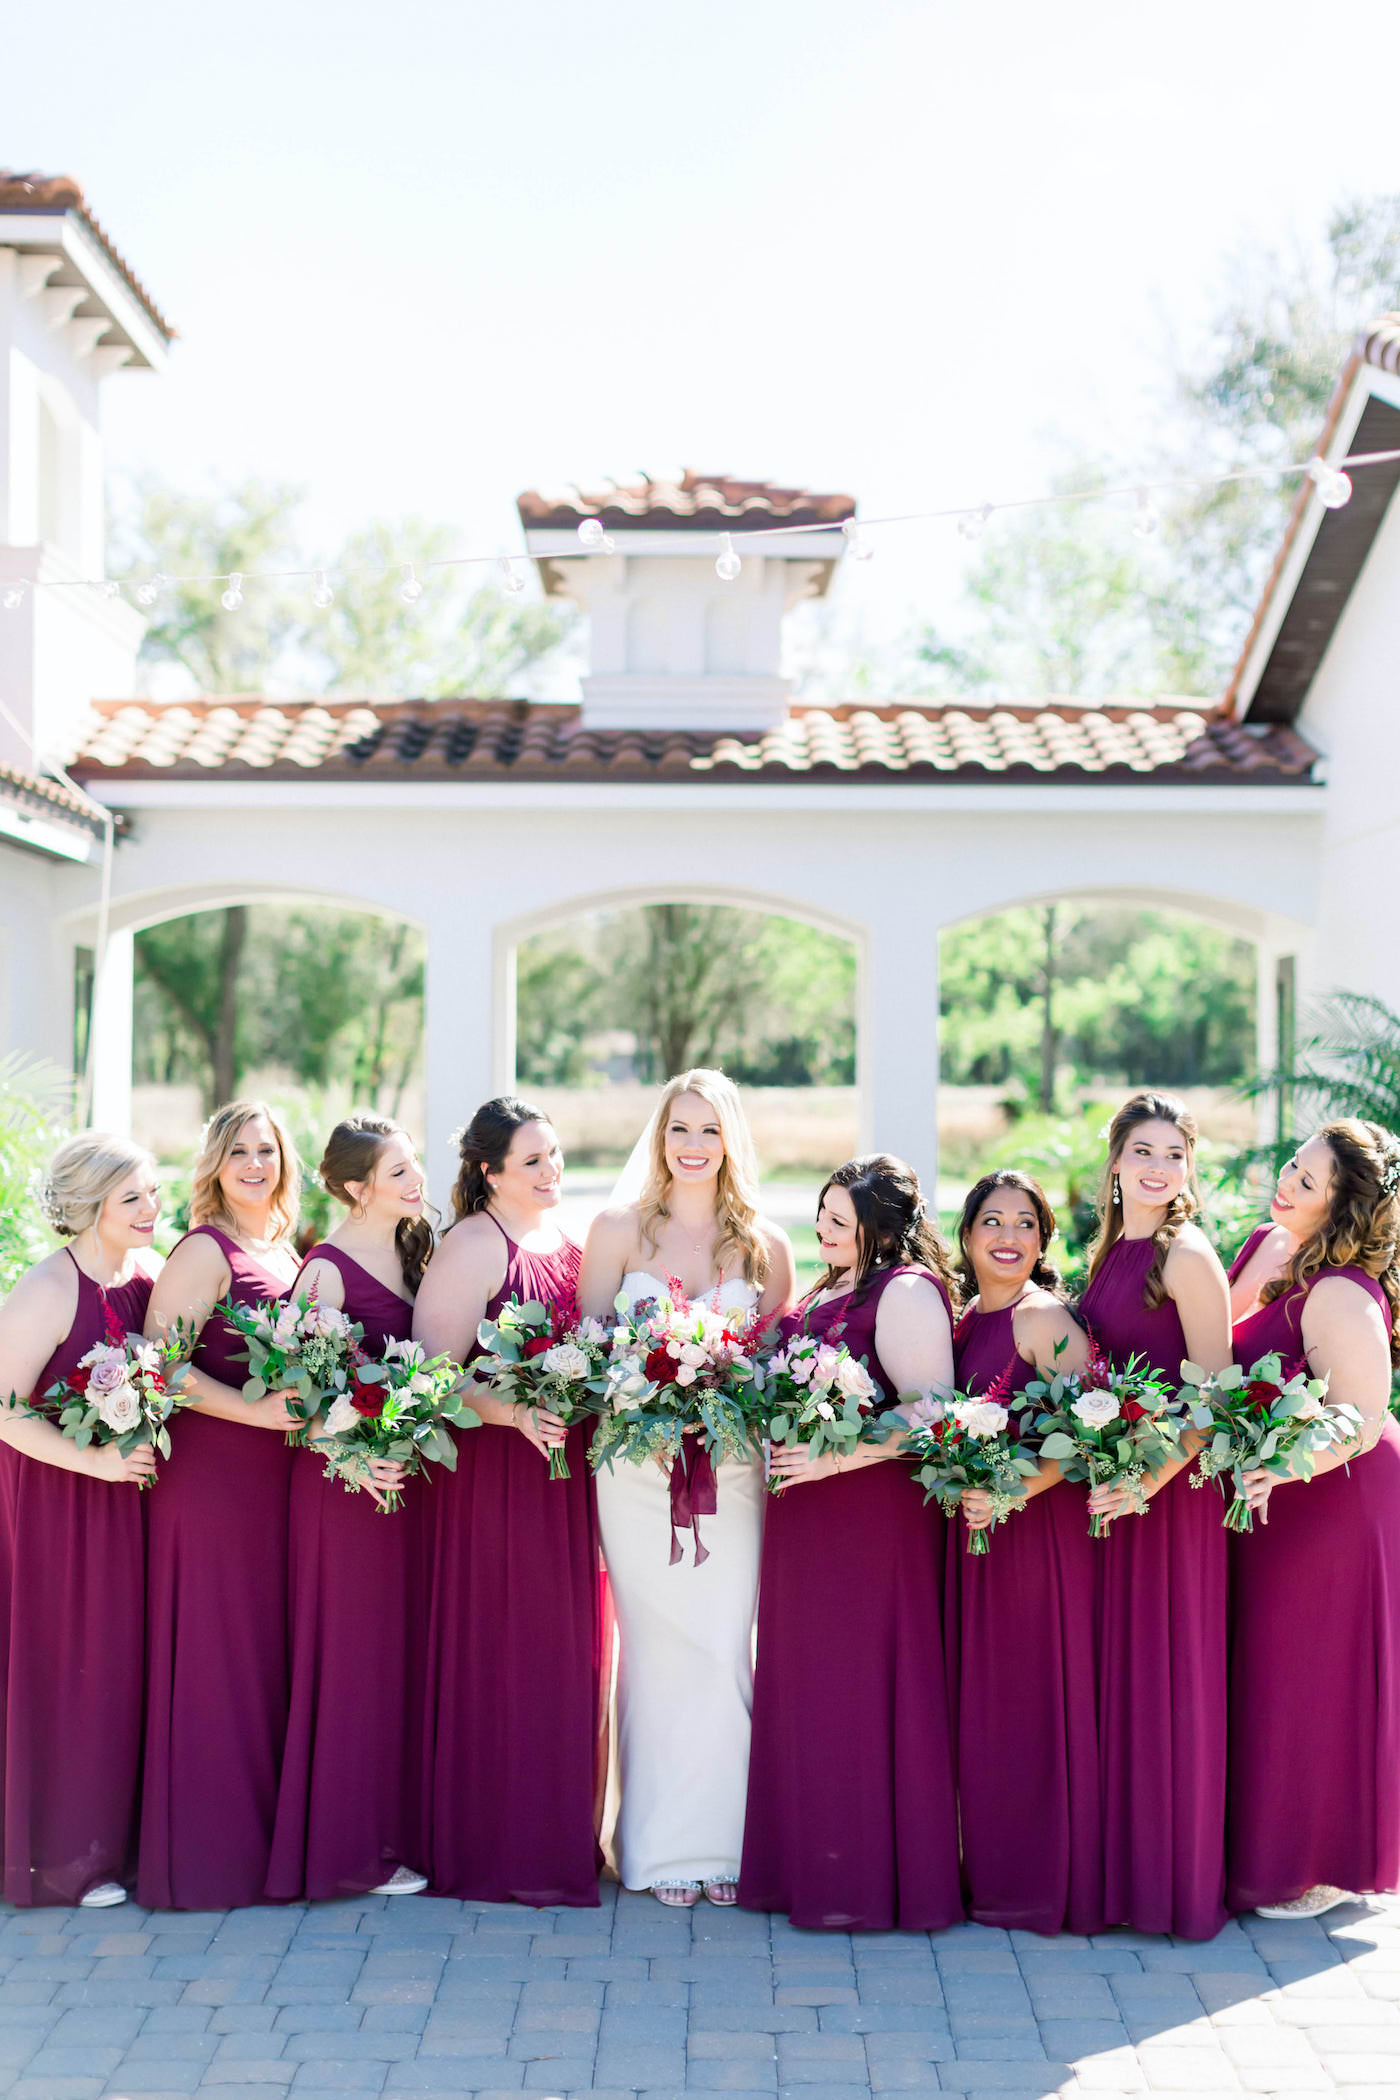 Burgundy Bordeaux Wine Deep Red Long Chiffon Bridesmaid Dresses | Outdoor Florida Wedding Bride and Bridesmaids Portrait | Burgundy and Blush Pink Bridal Bouquet with Roses and Astilbe and Eucalyptus Greenery | Shauna and Jordon Photography